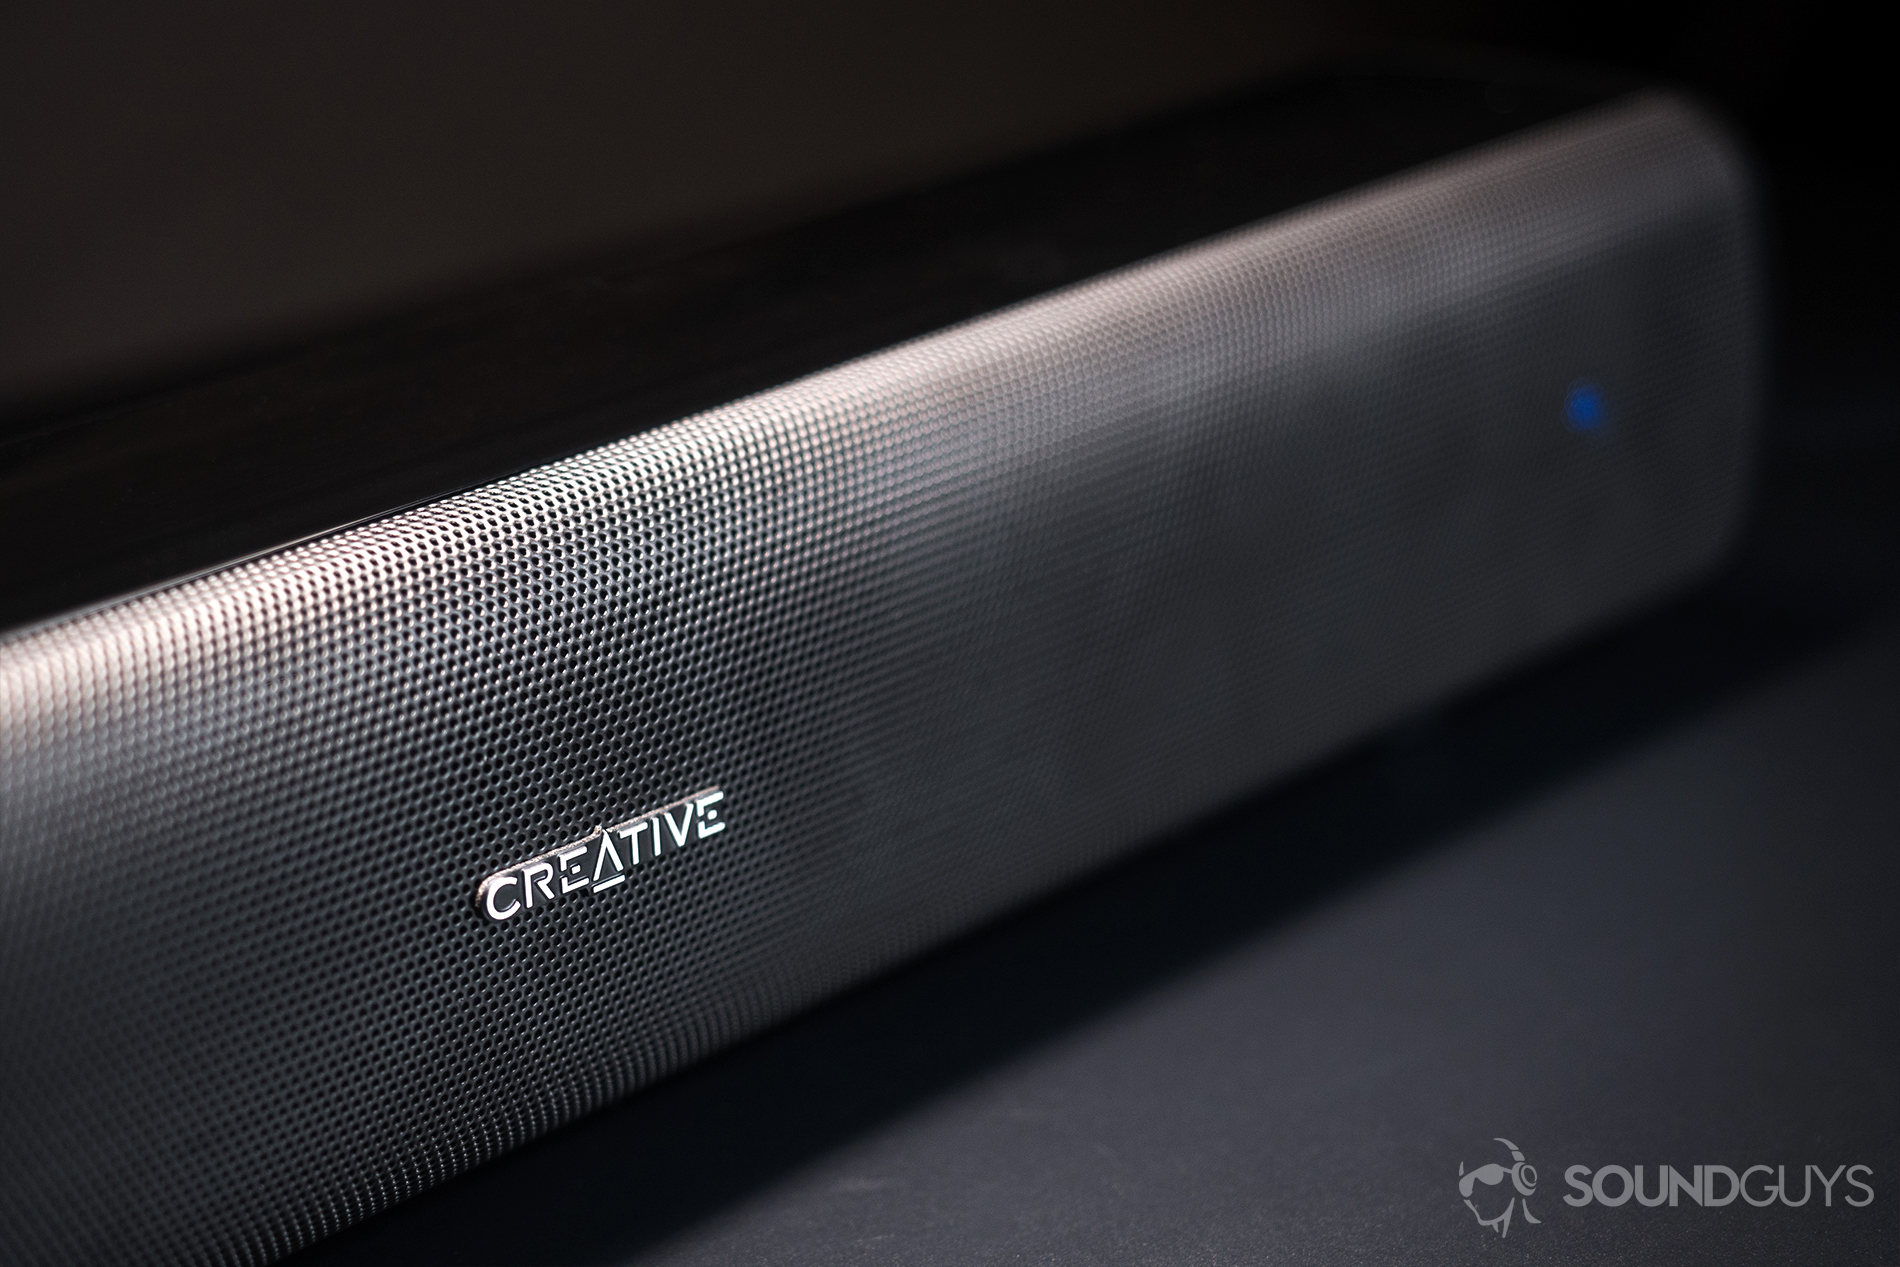 Creative Stage Air: The Creative brand name on the speaker grill.